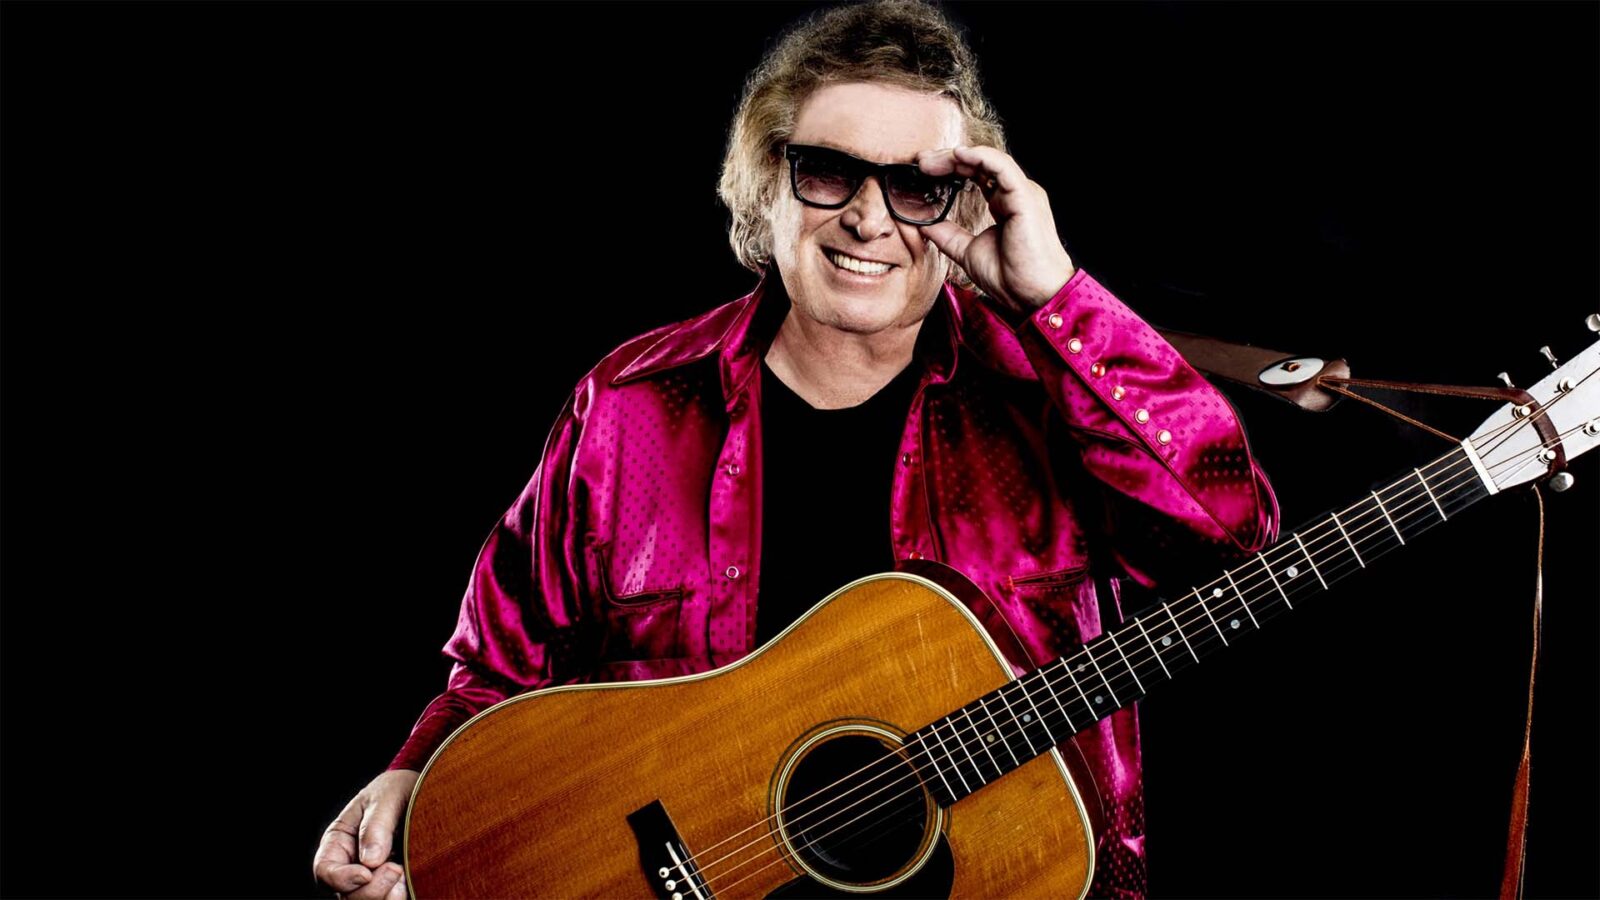 Don McLean wearing glasses, smiling at the camera with a guitar hanging from his shoulder and wearing a bright pink shirt